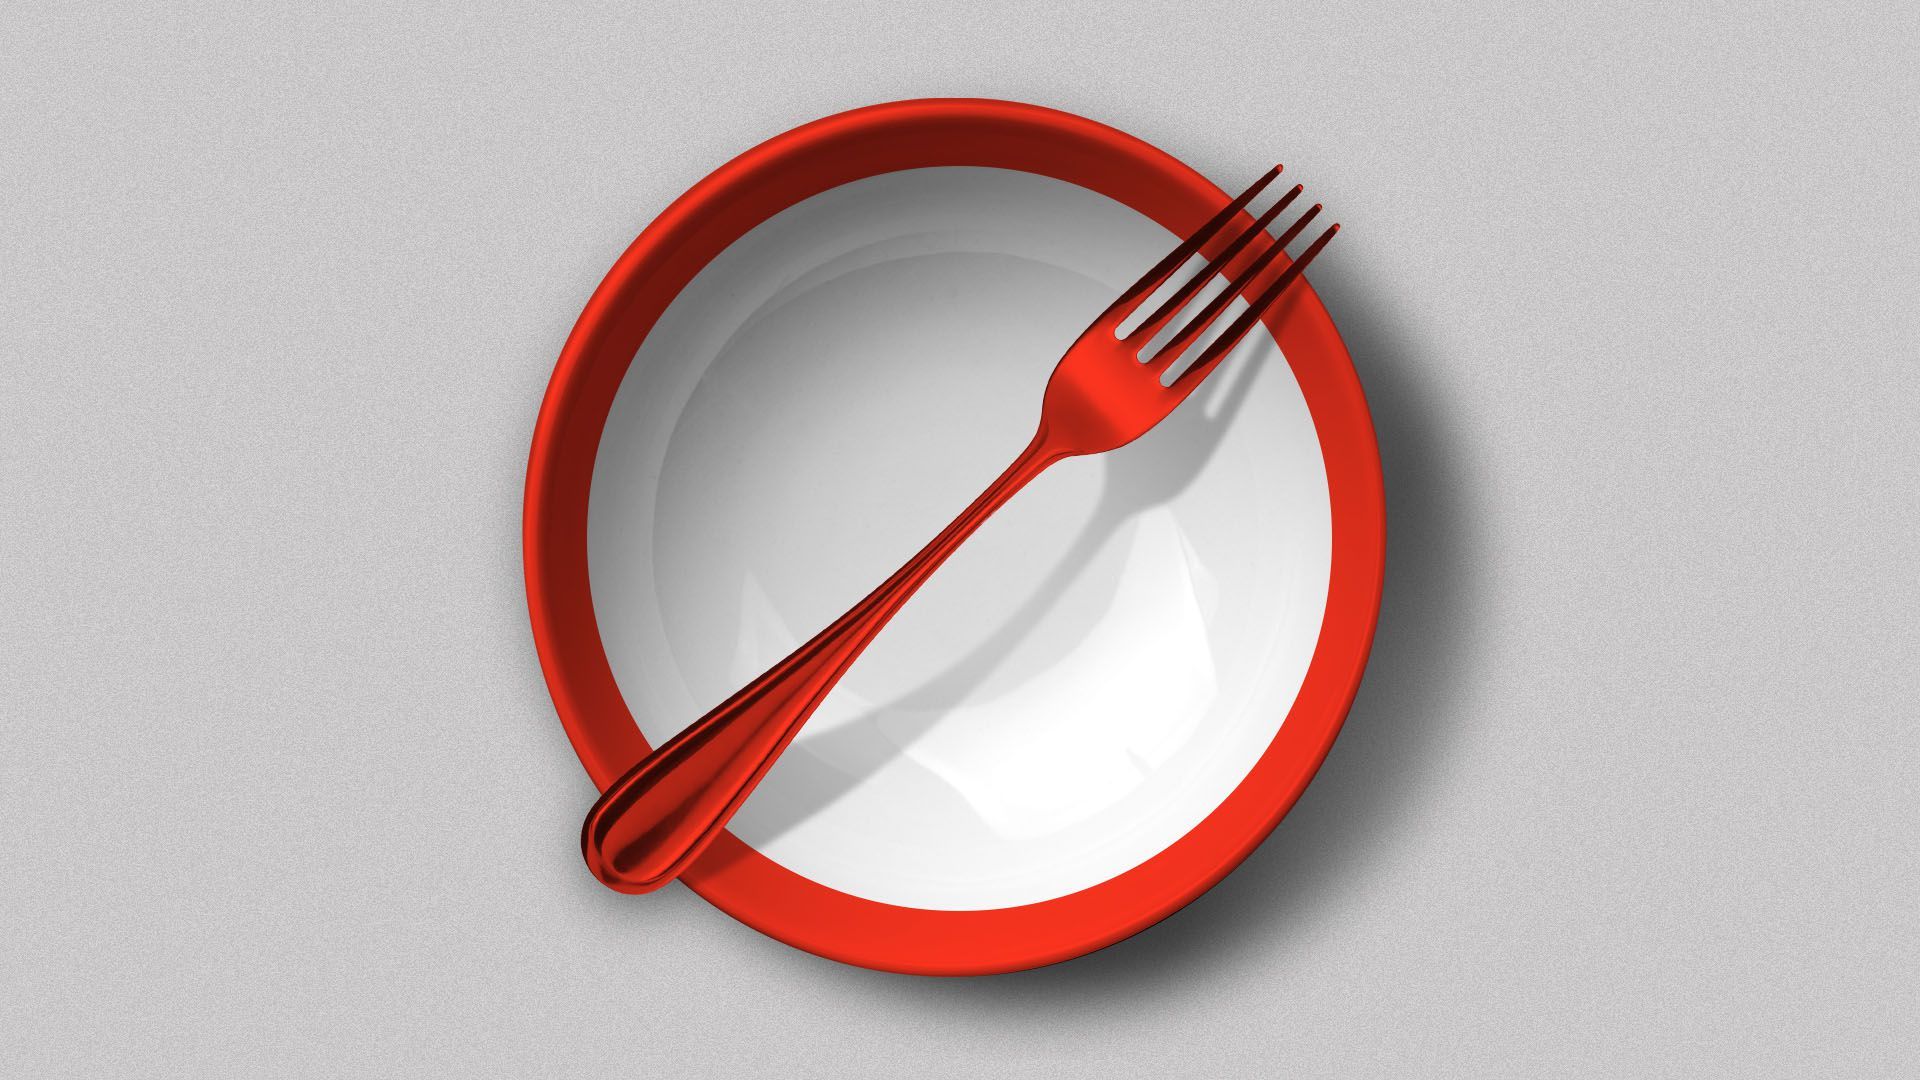 Illustration of a bowl and fork forming a "no" symbol